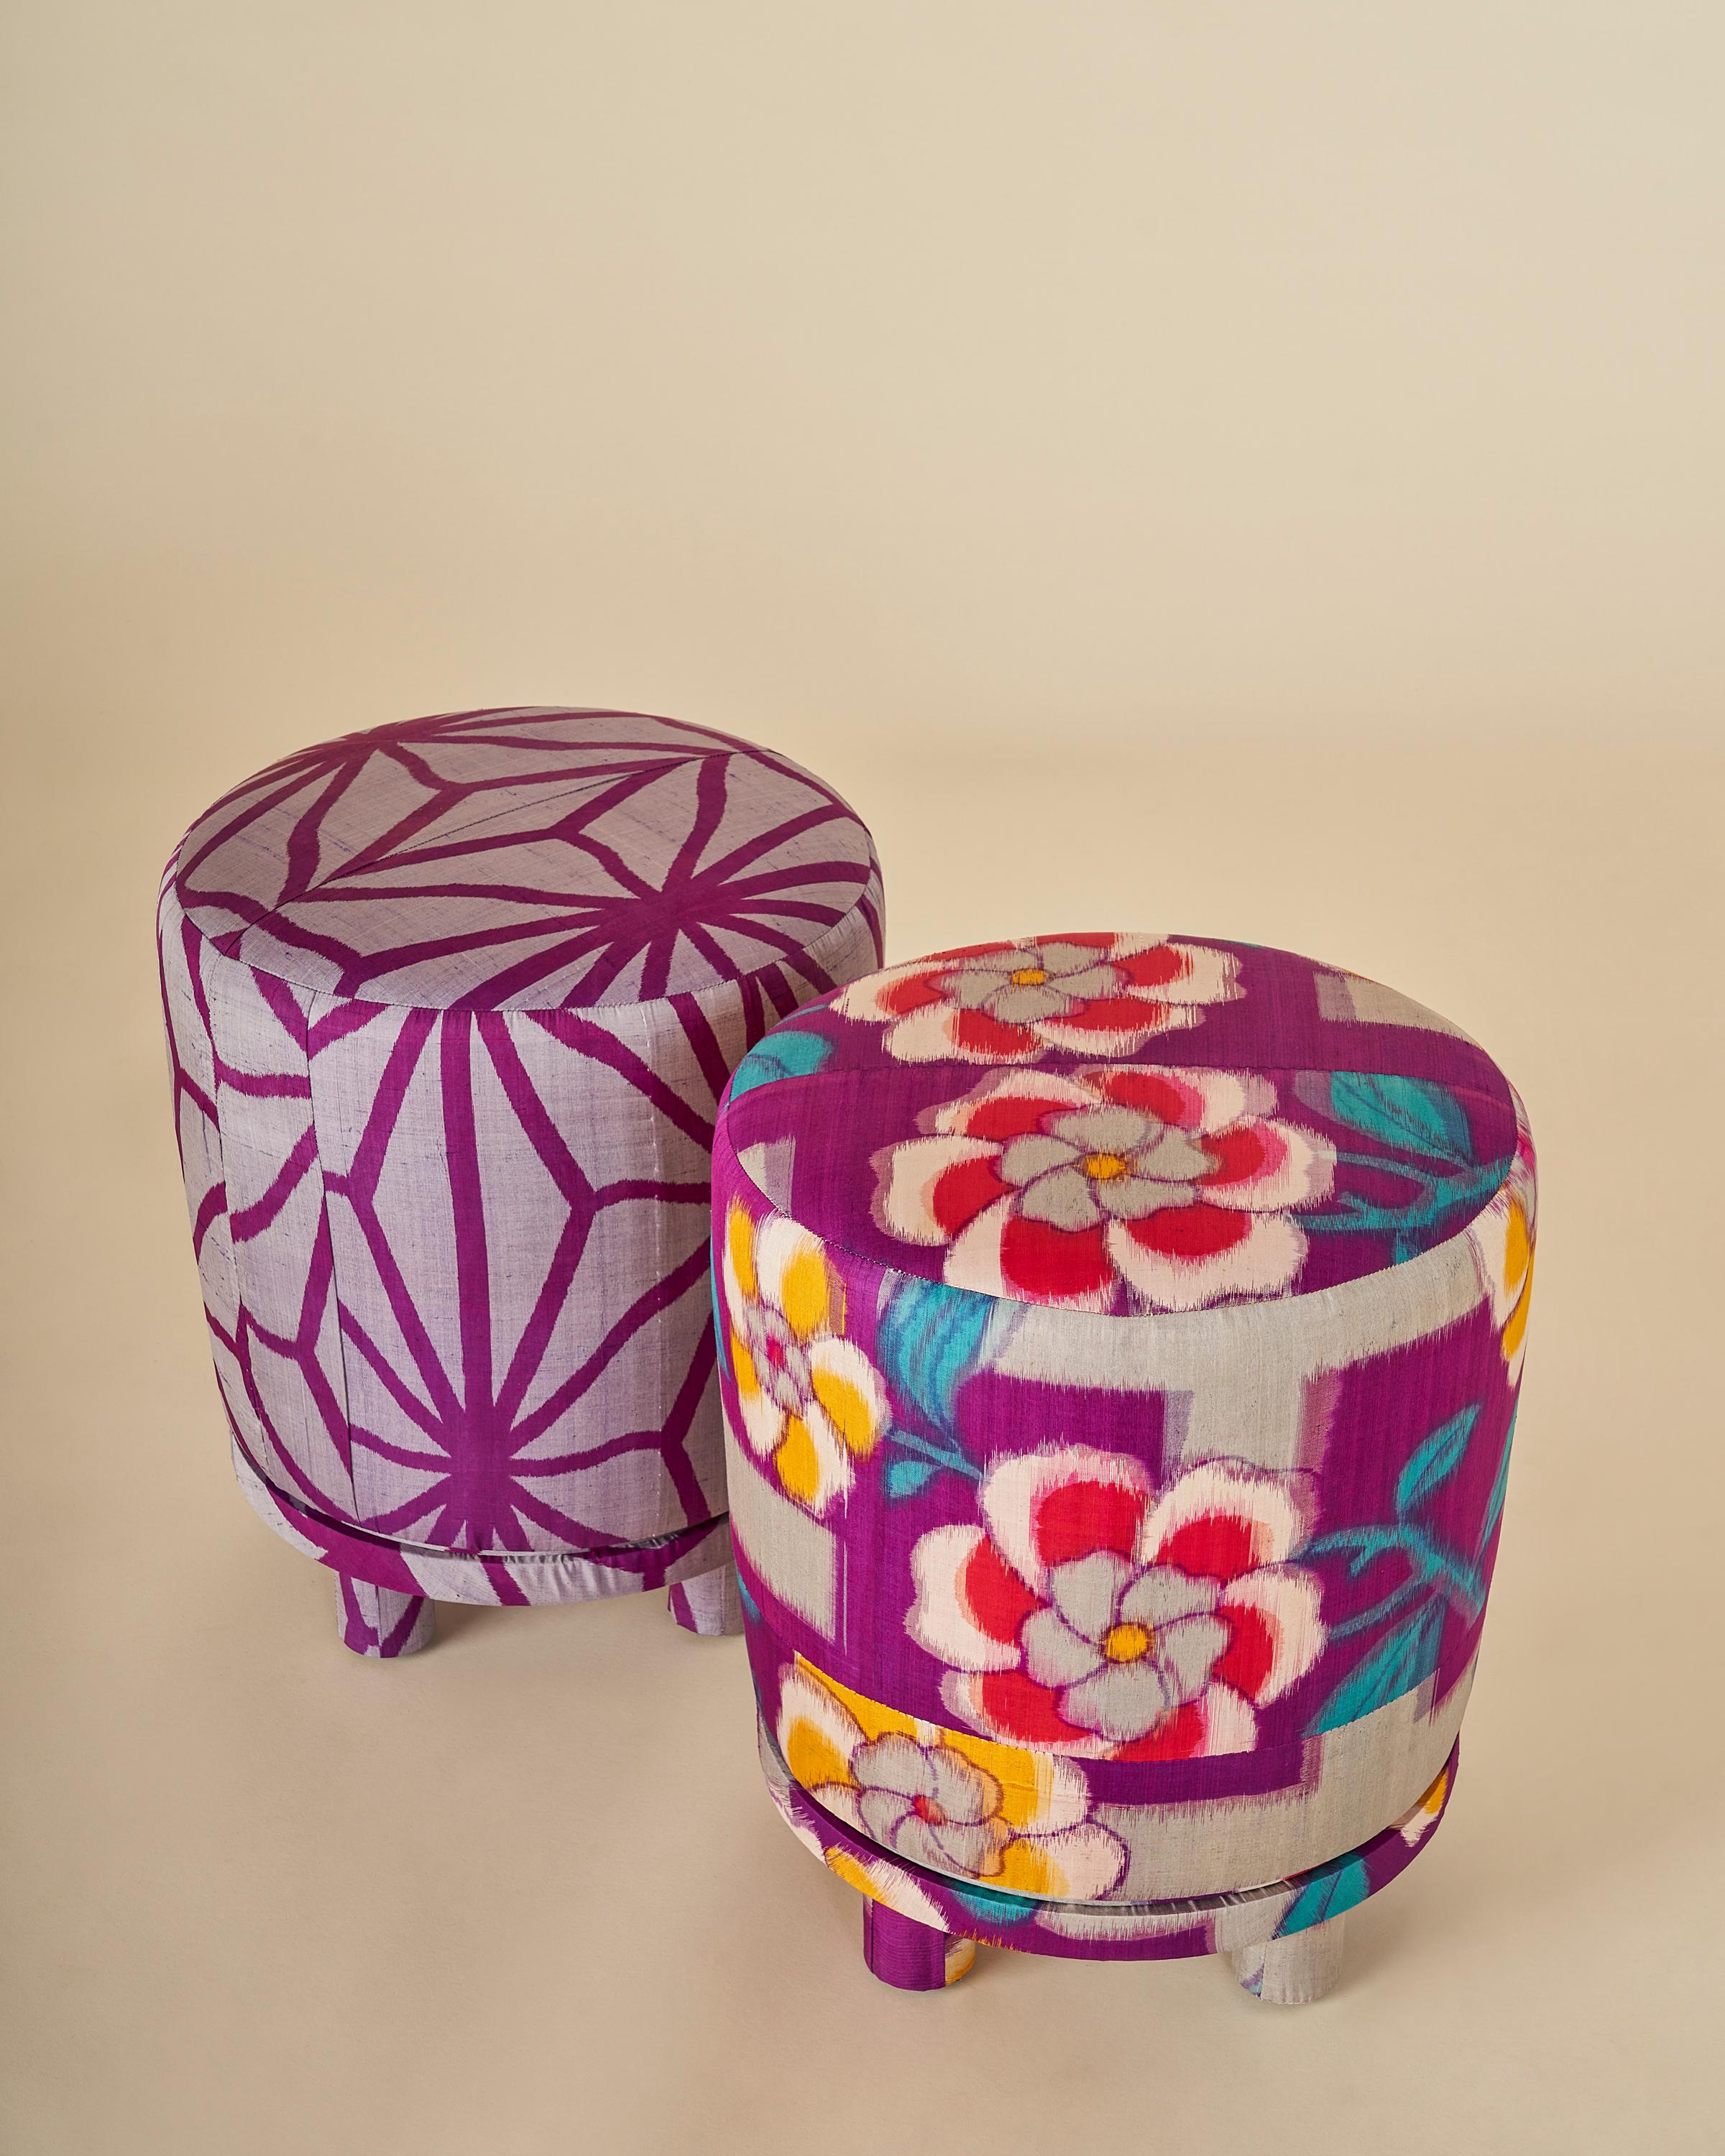 A pair of our Orleans ottoman upholstered in one-of-a-kind vintage silk Kimono fabrics with beautiful bright floral patterns. Artful seaming and pattern placement create a small and gorgeous showpiece for your space. 

In stock and ready to ship!